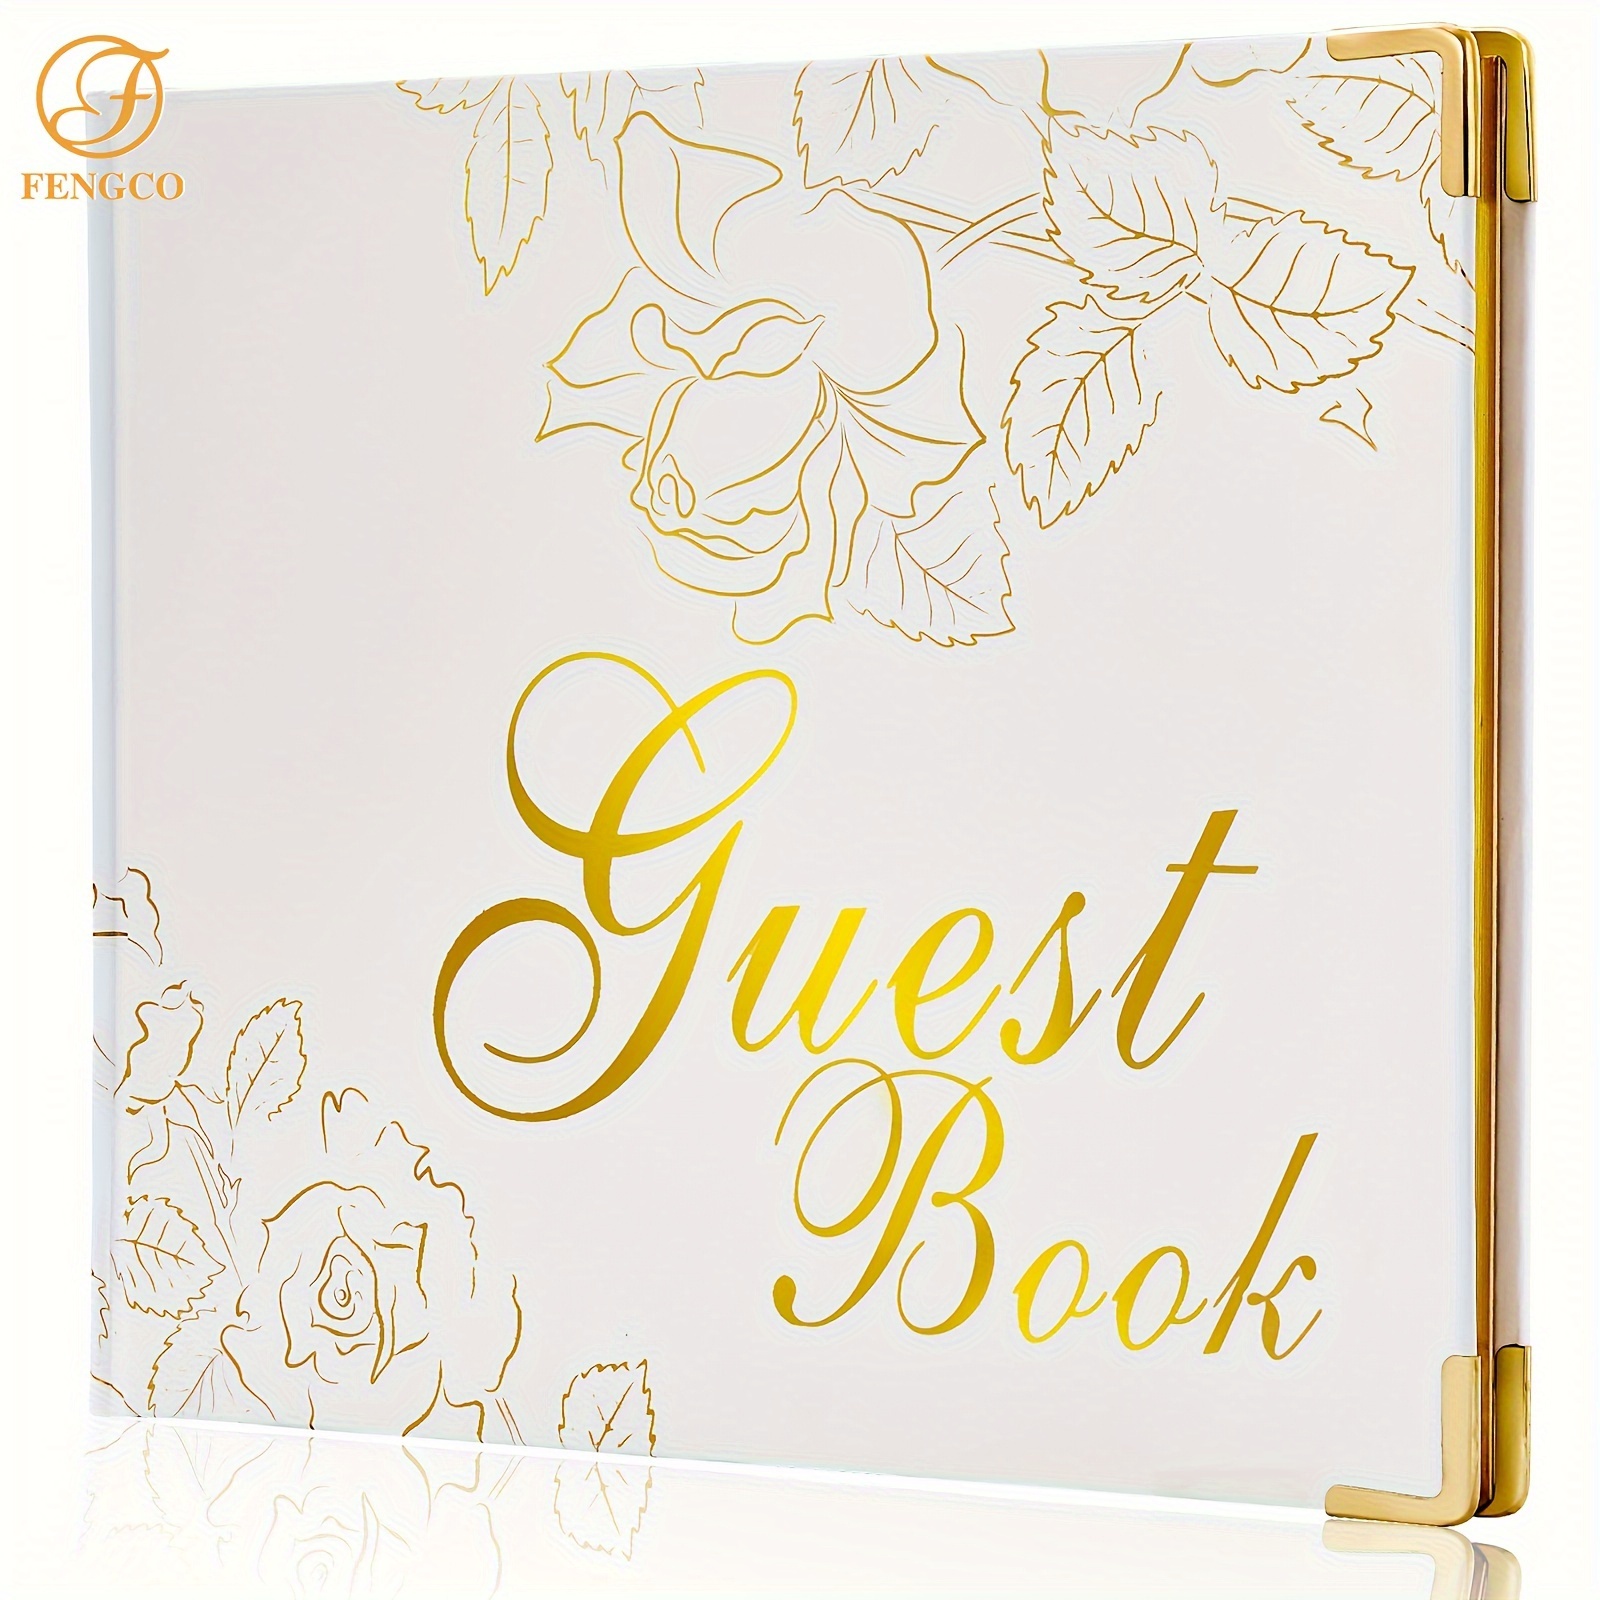 

1pc, Guest Book 9"x7" Hardcover 120 Page/60 Sheets-golden Foil Gilded Edgesfor Guests To Sign At A Wedding, Party, Bridal Shower